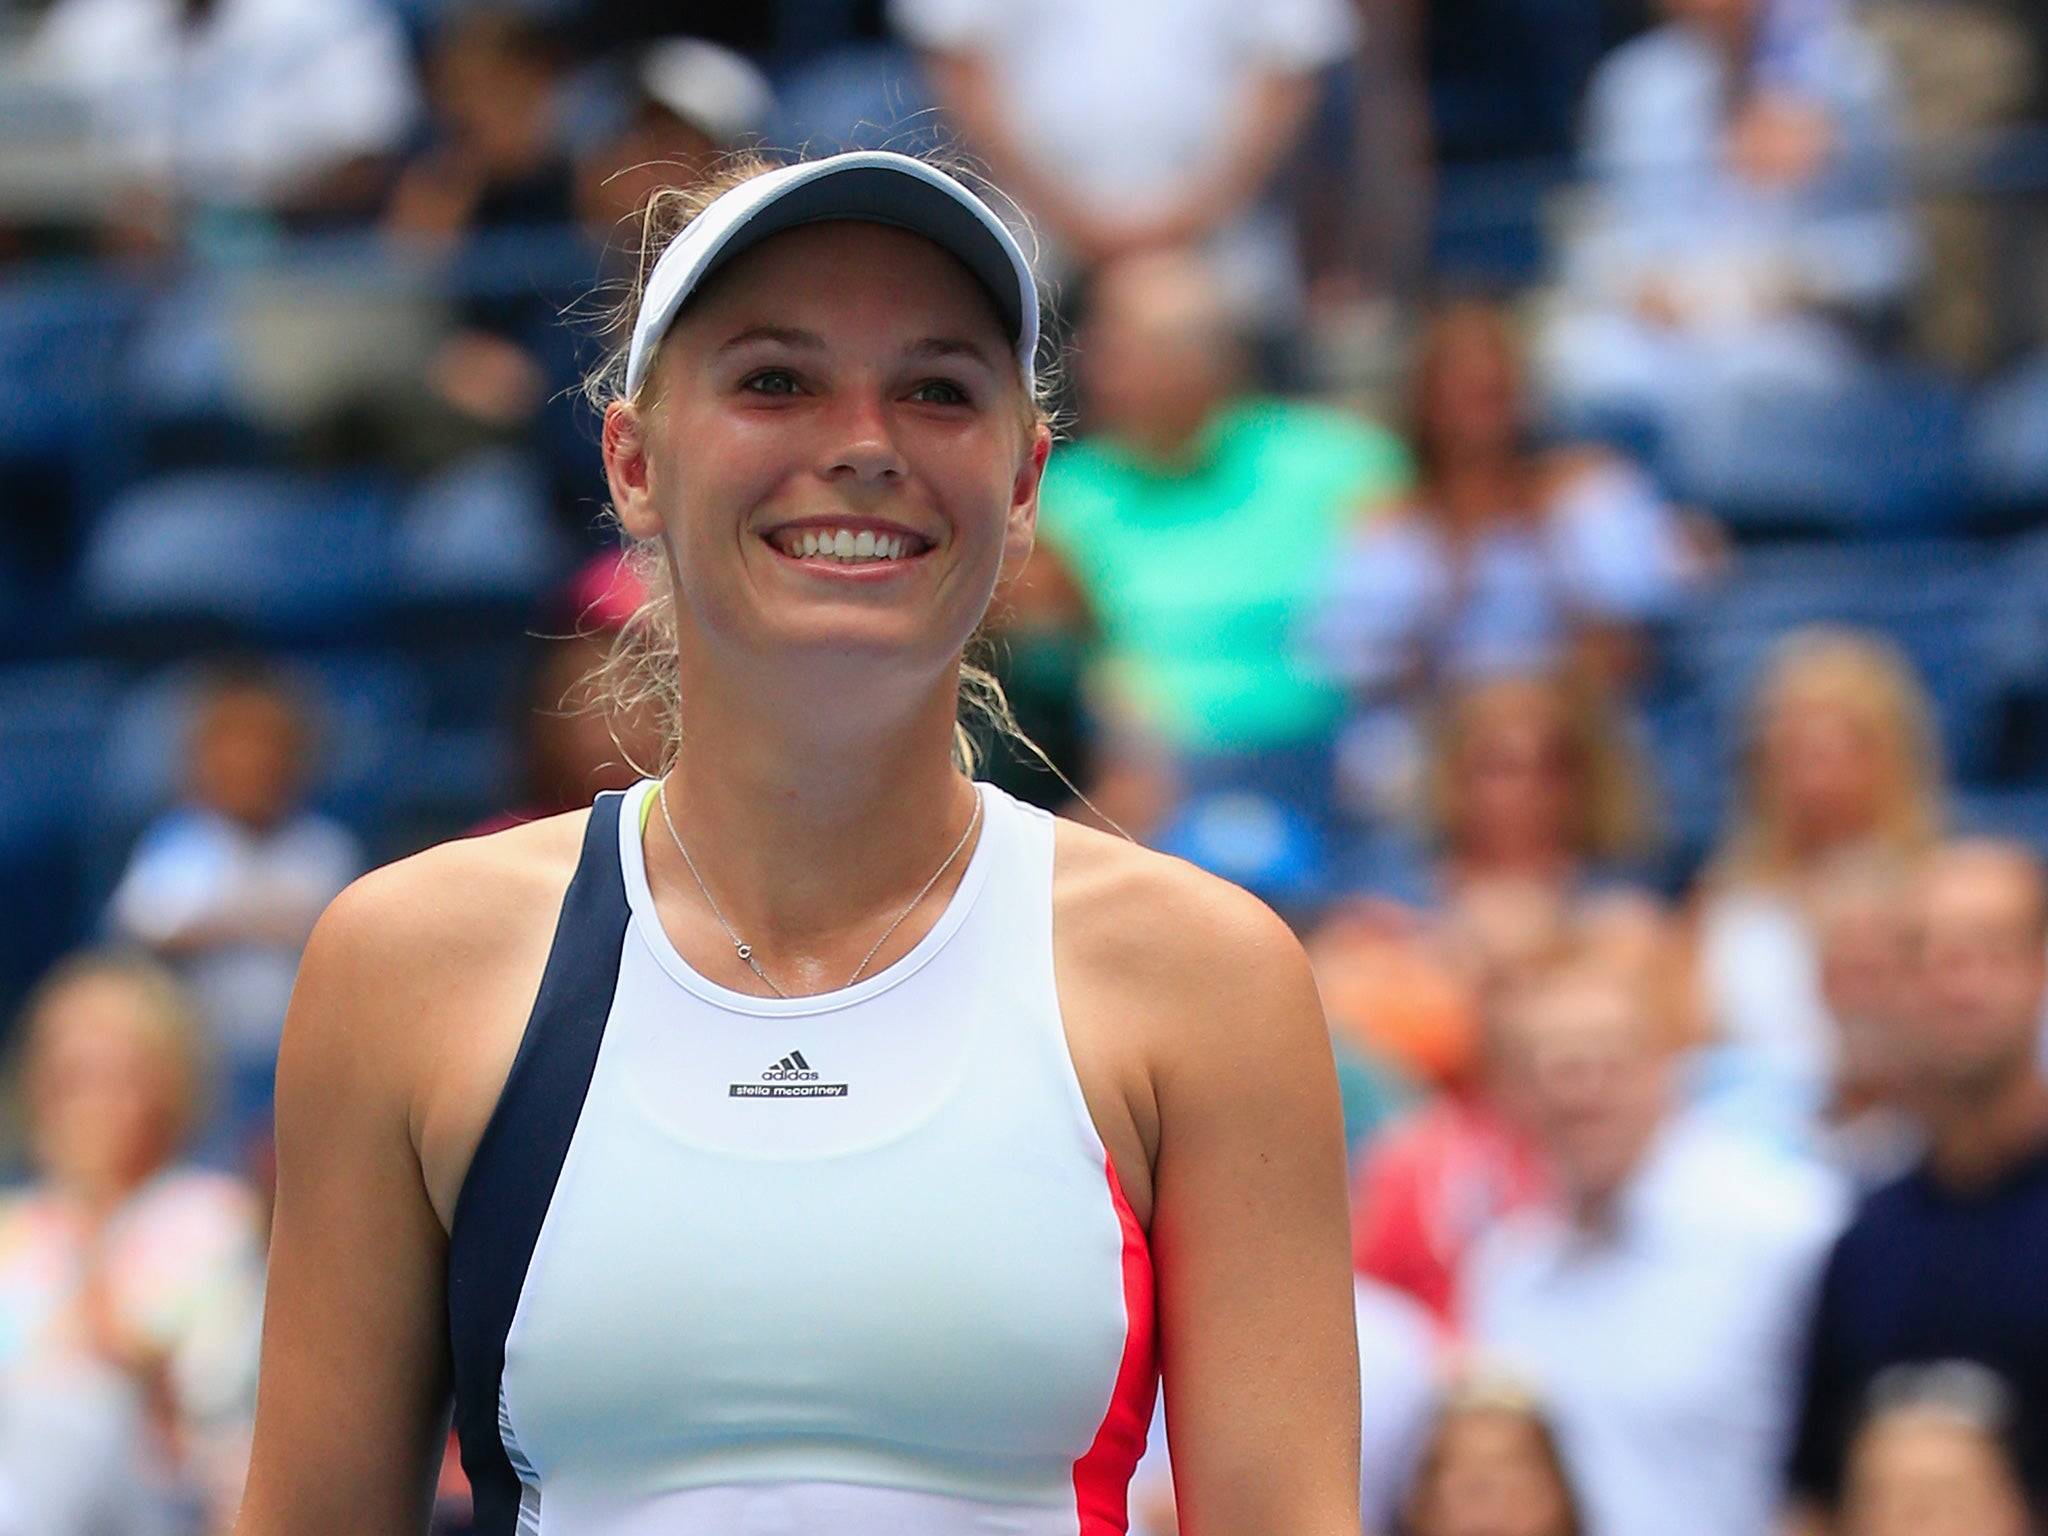 Wozniacki has reversed a slide down the world rankings with the win